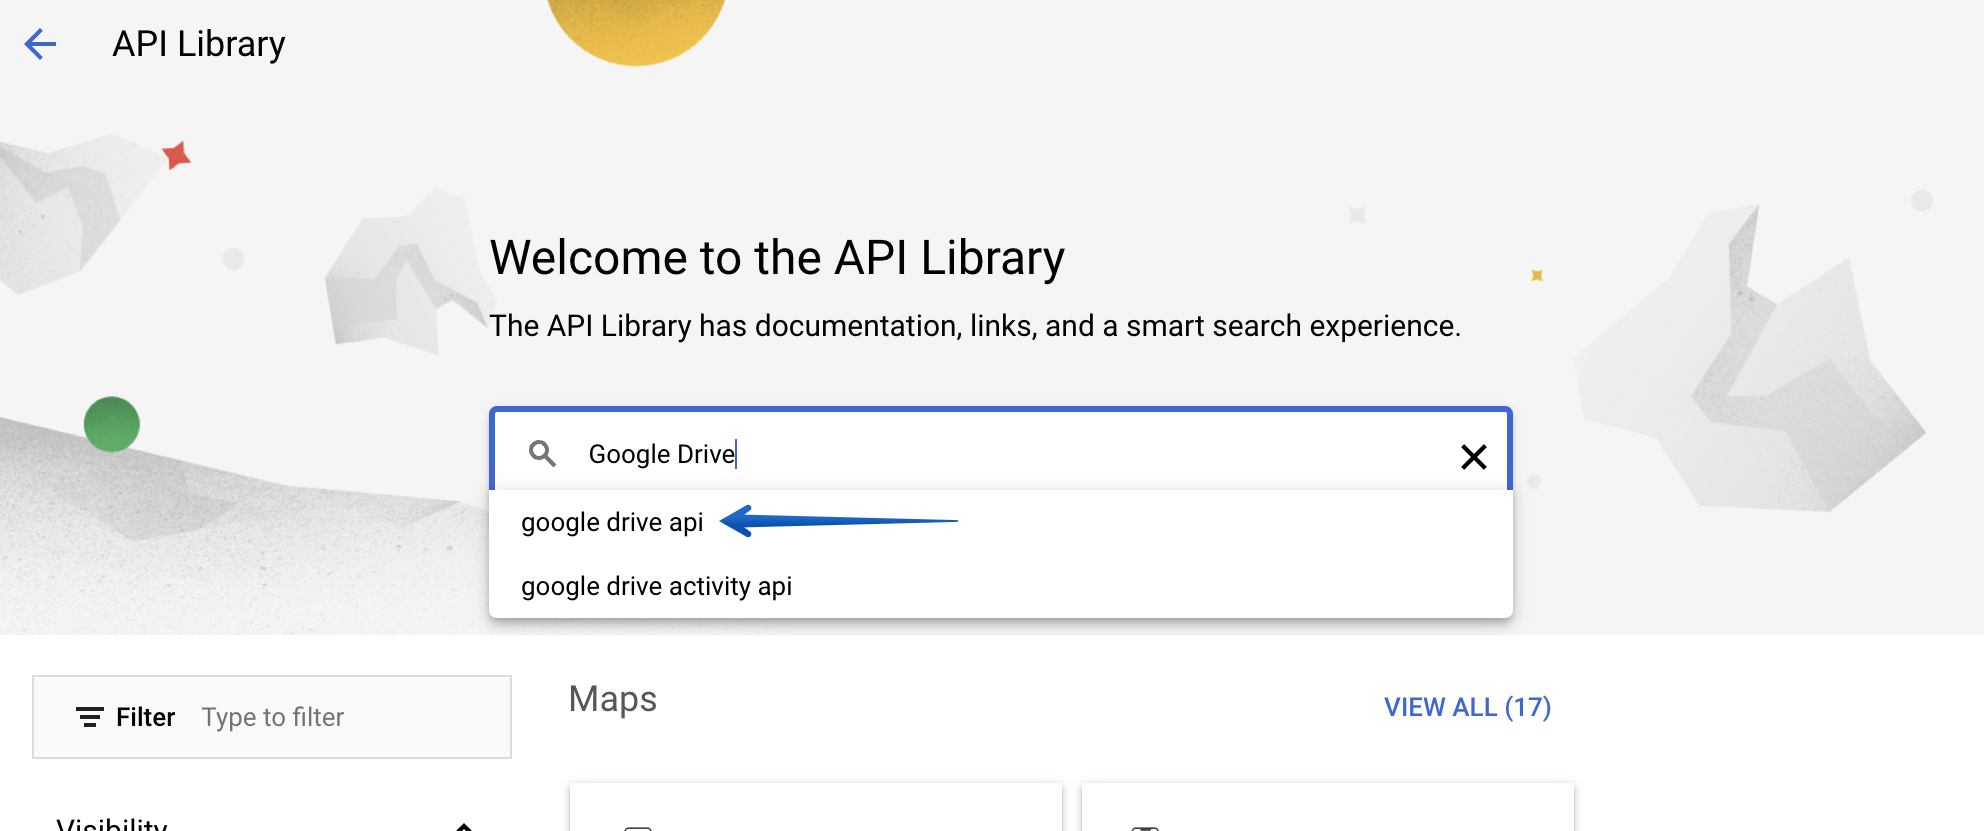 Entering the search for Google Drive API in the API Library search box